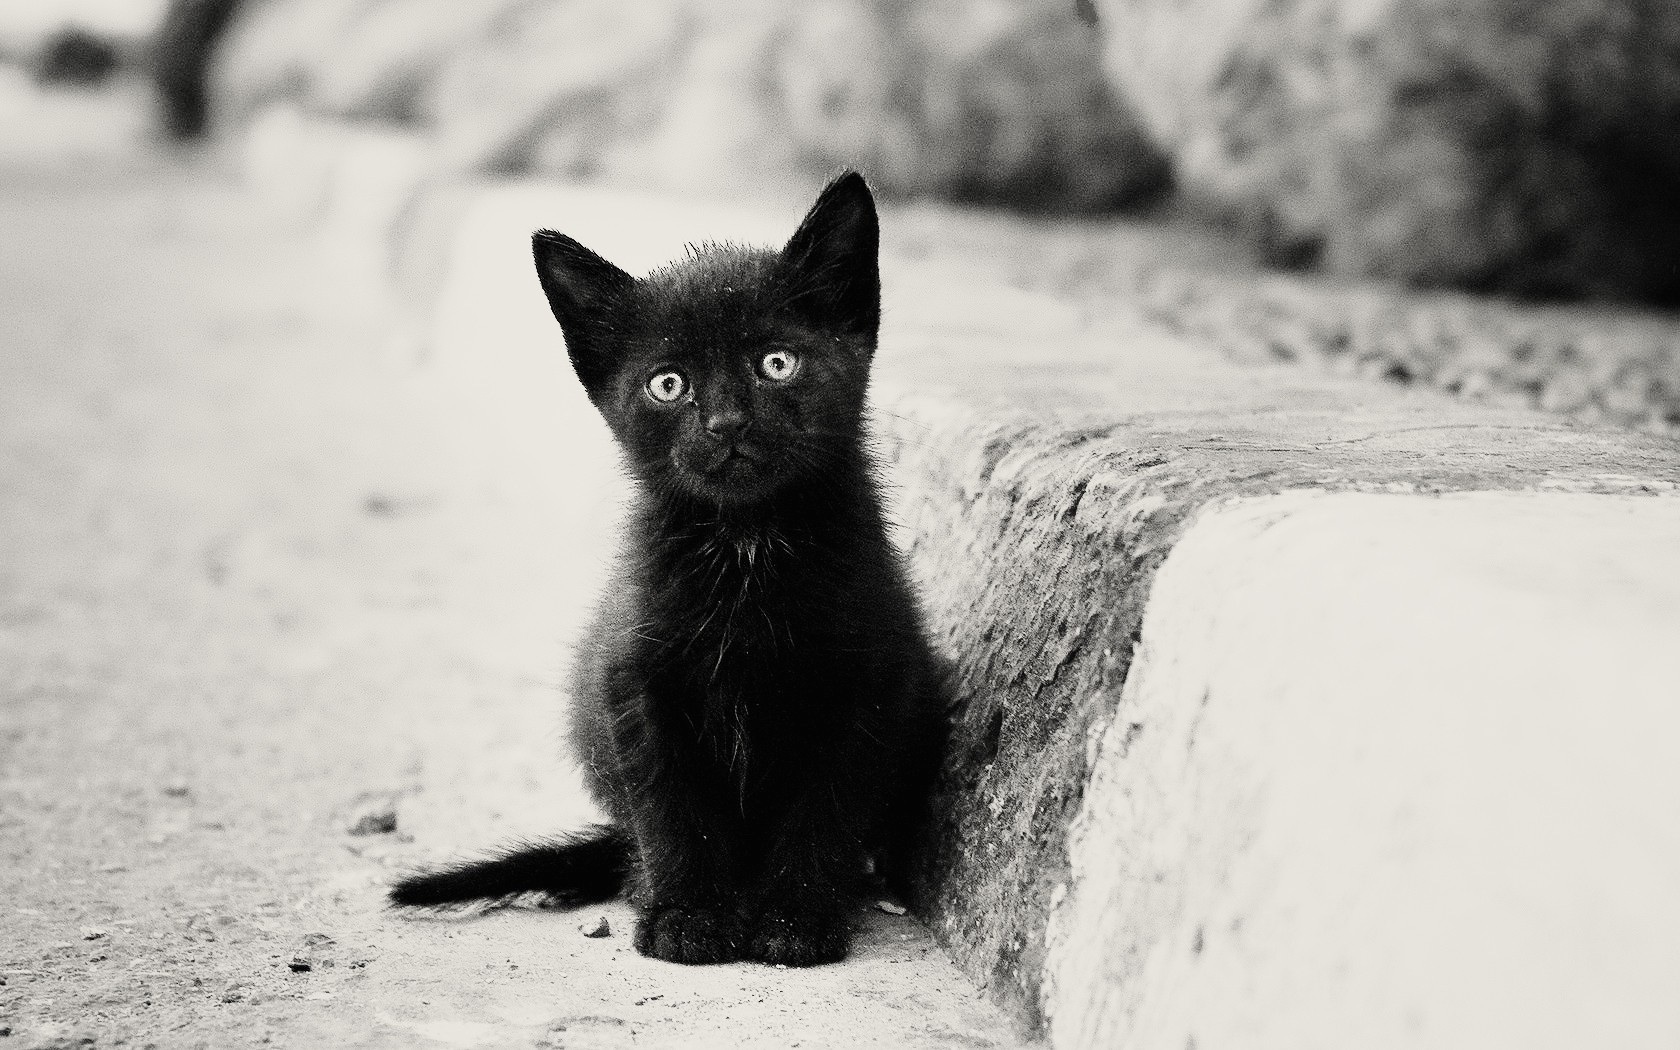 cat pictures for wallpaper,cat,black cat,black,small to medium sized cats,black and white